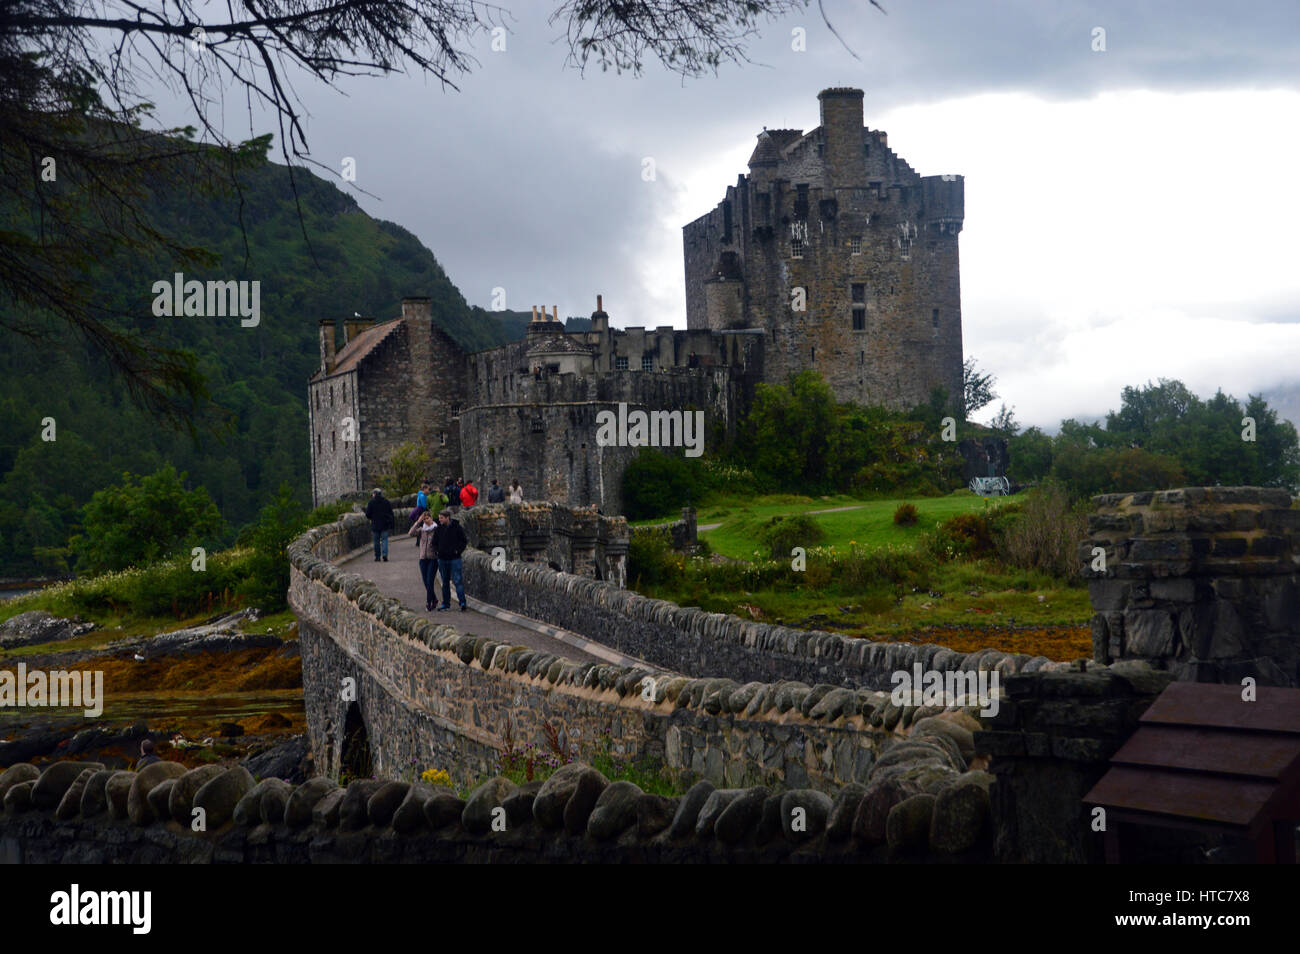 Tourists Walking on the Bridge to Eilean Donan Castle on the Road to the Isles in the Scottish Highlands. Stock Photo